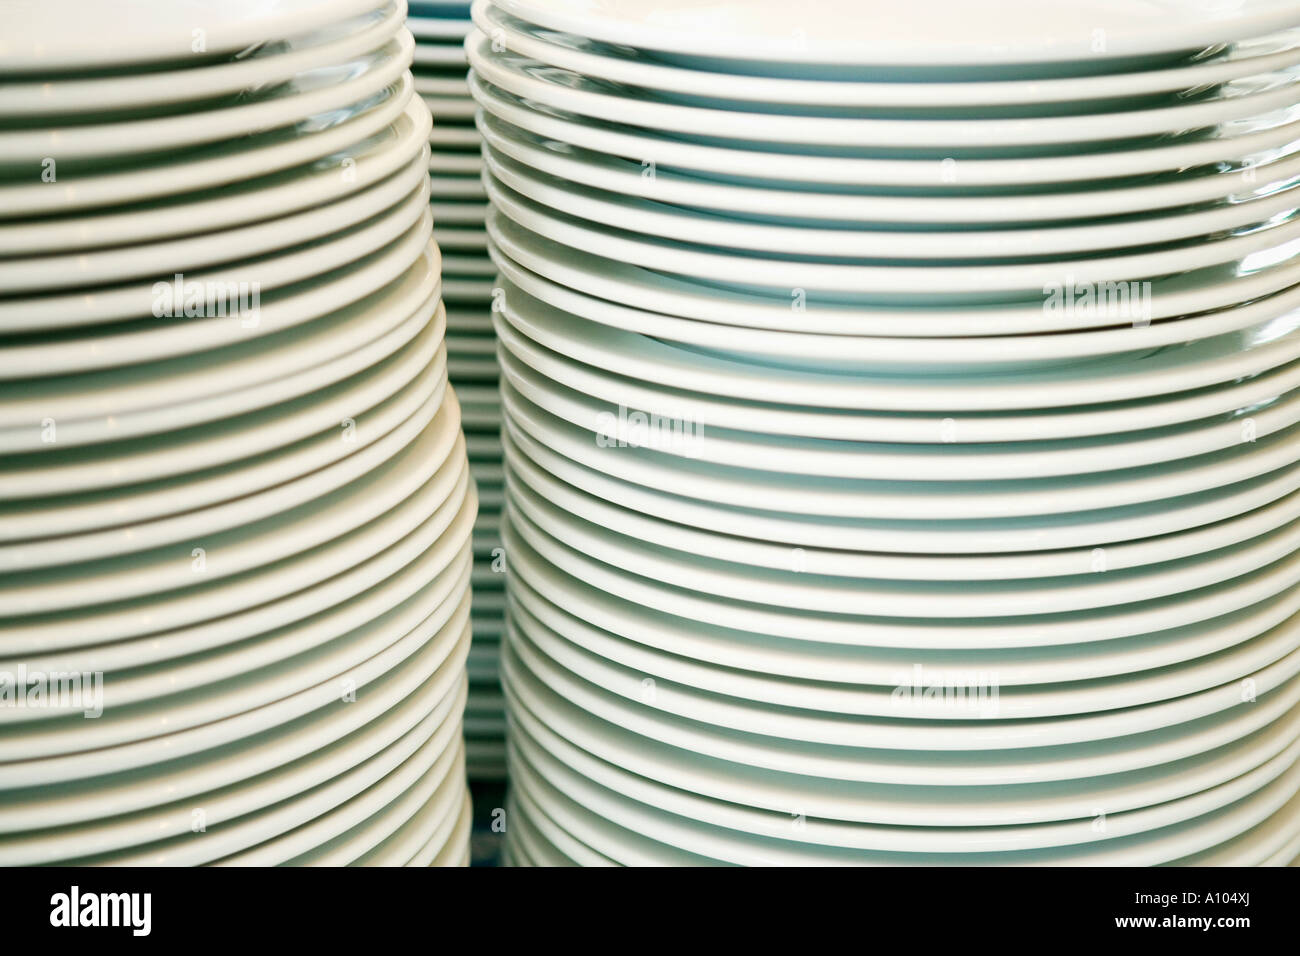 Stacked dishes Stock Photo